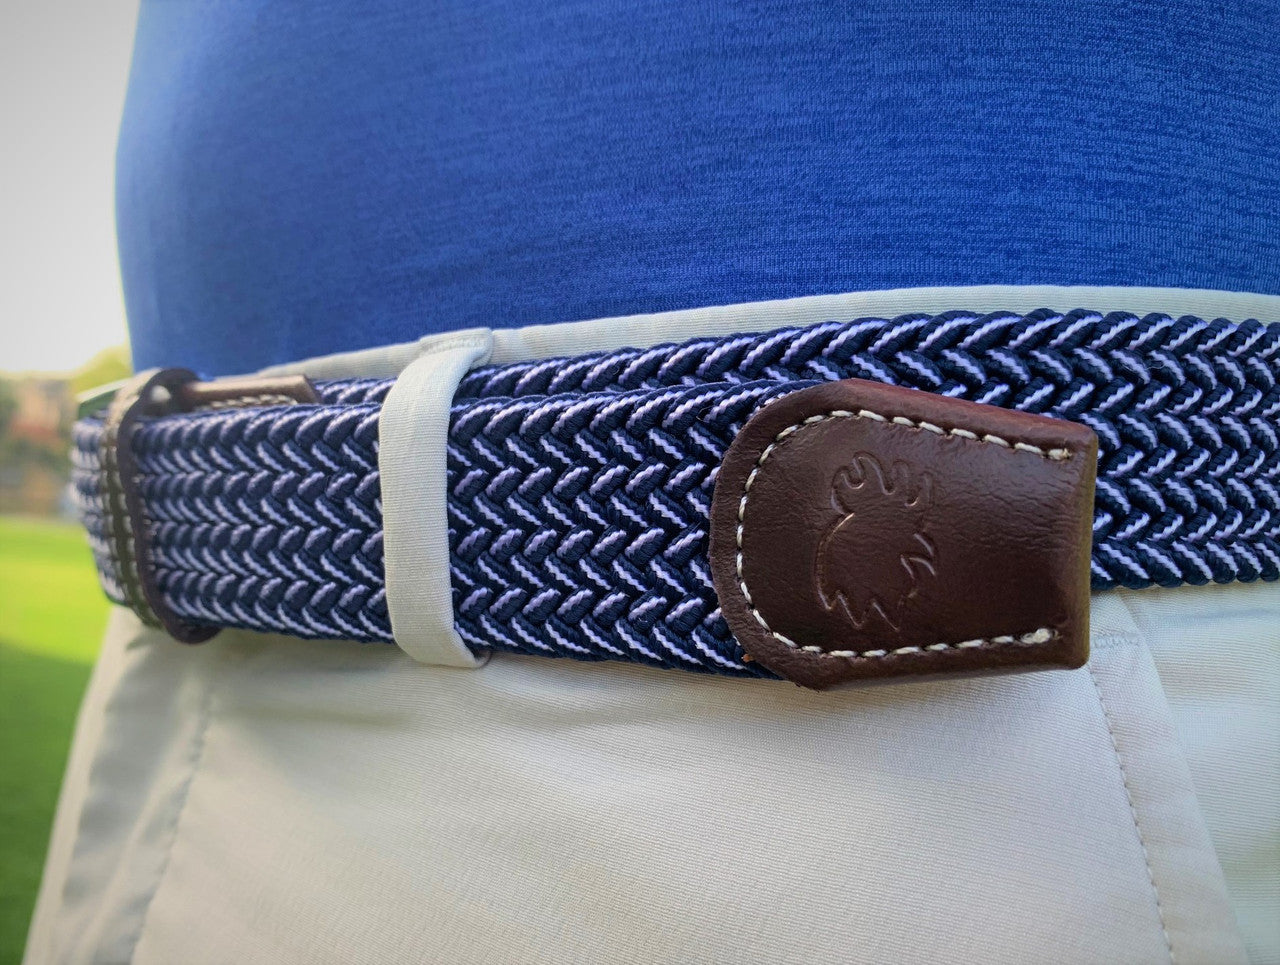 Belts- The Ponte Vedra Two Toned Woven Stretch Belt-102-Roostas